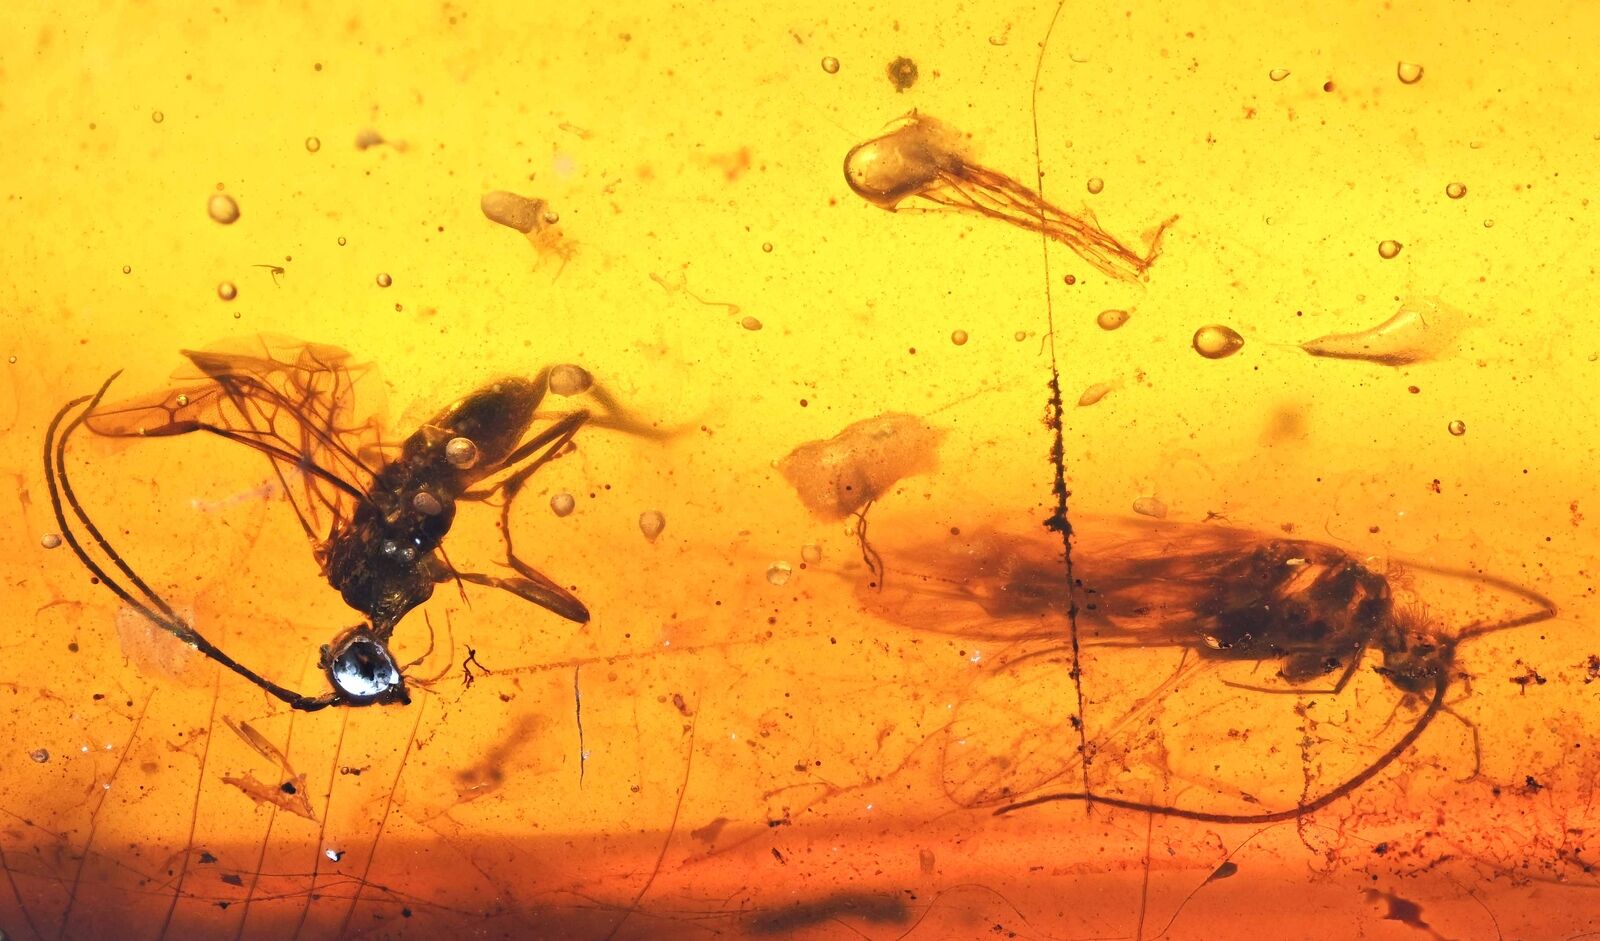 Several Caddisflies and a wasp, Fossil inclusion in Burmese Amber